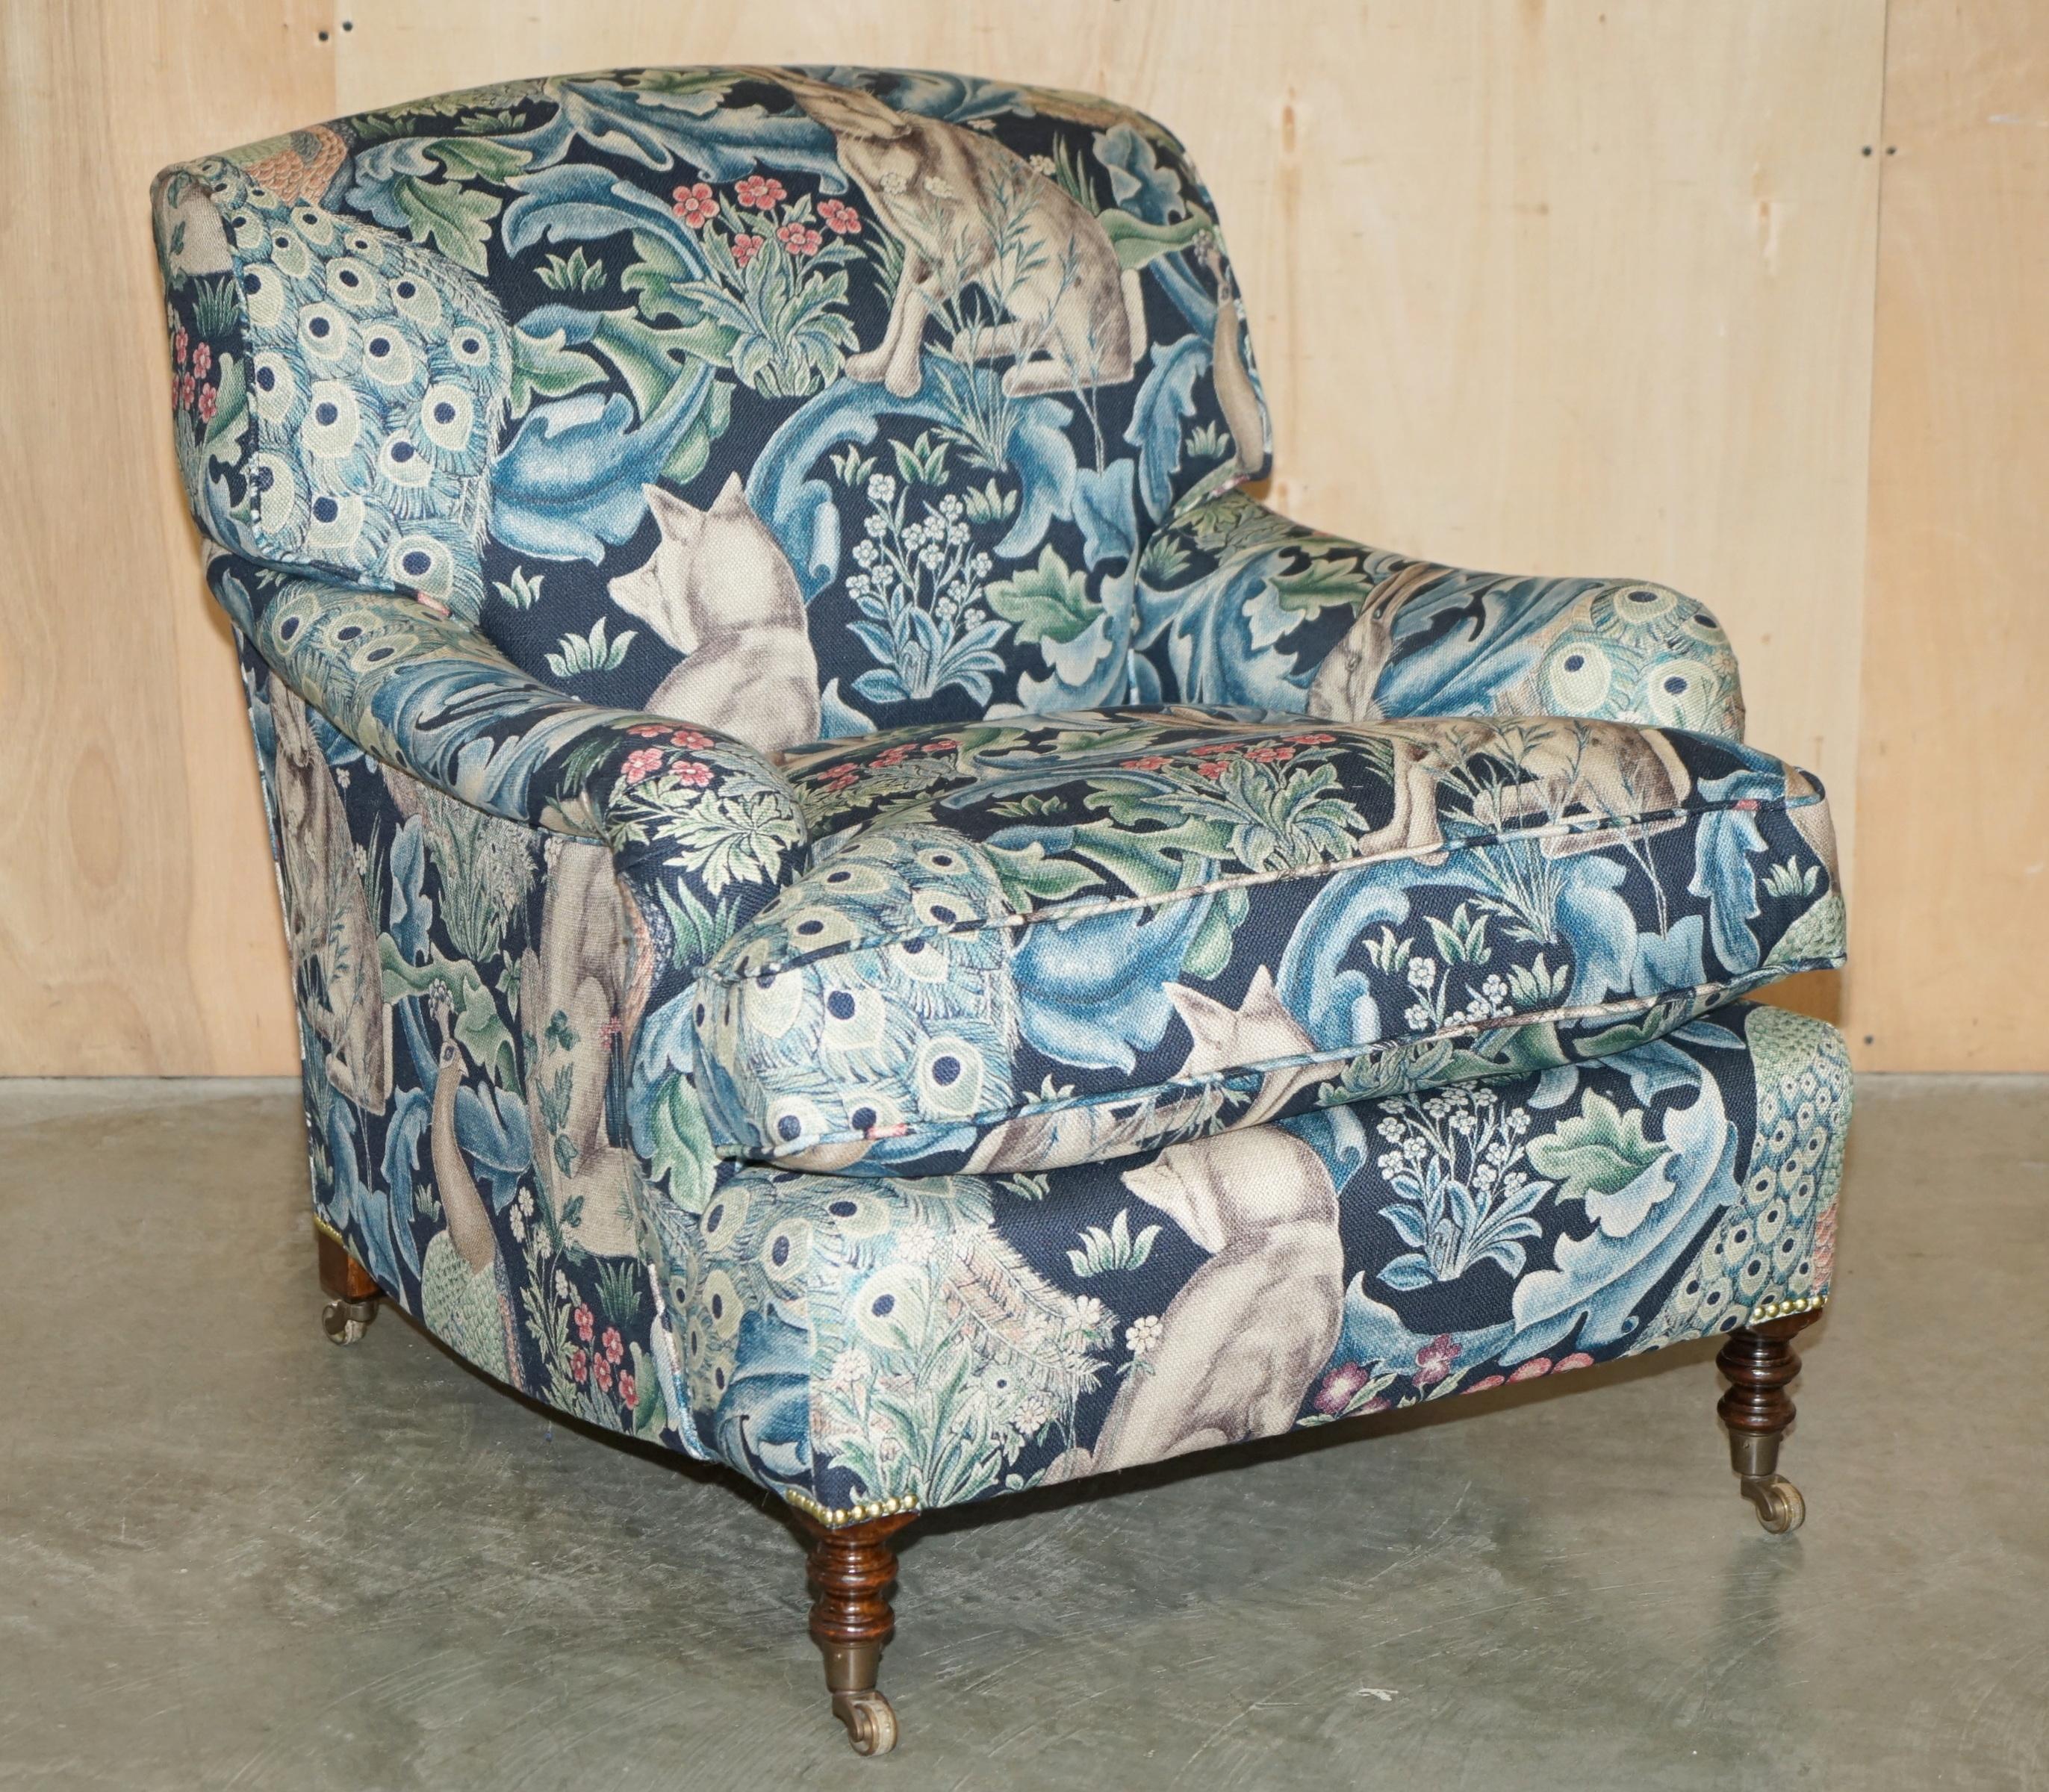  GEORGE SMiTH HOWARD & SON'S WILLIAM MORRIS SOFA ARMCHAIR SUITE For Sale 4